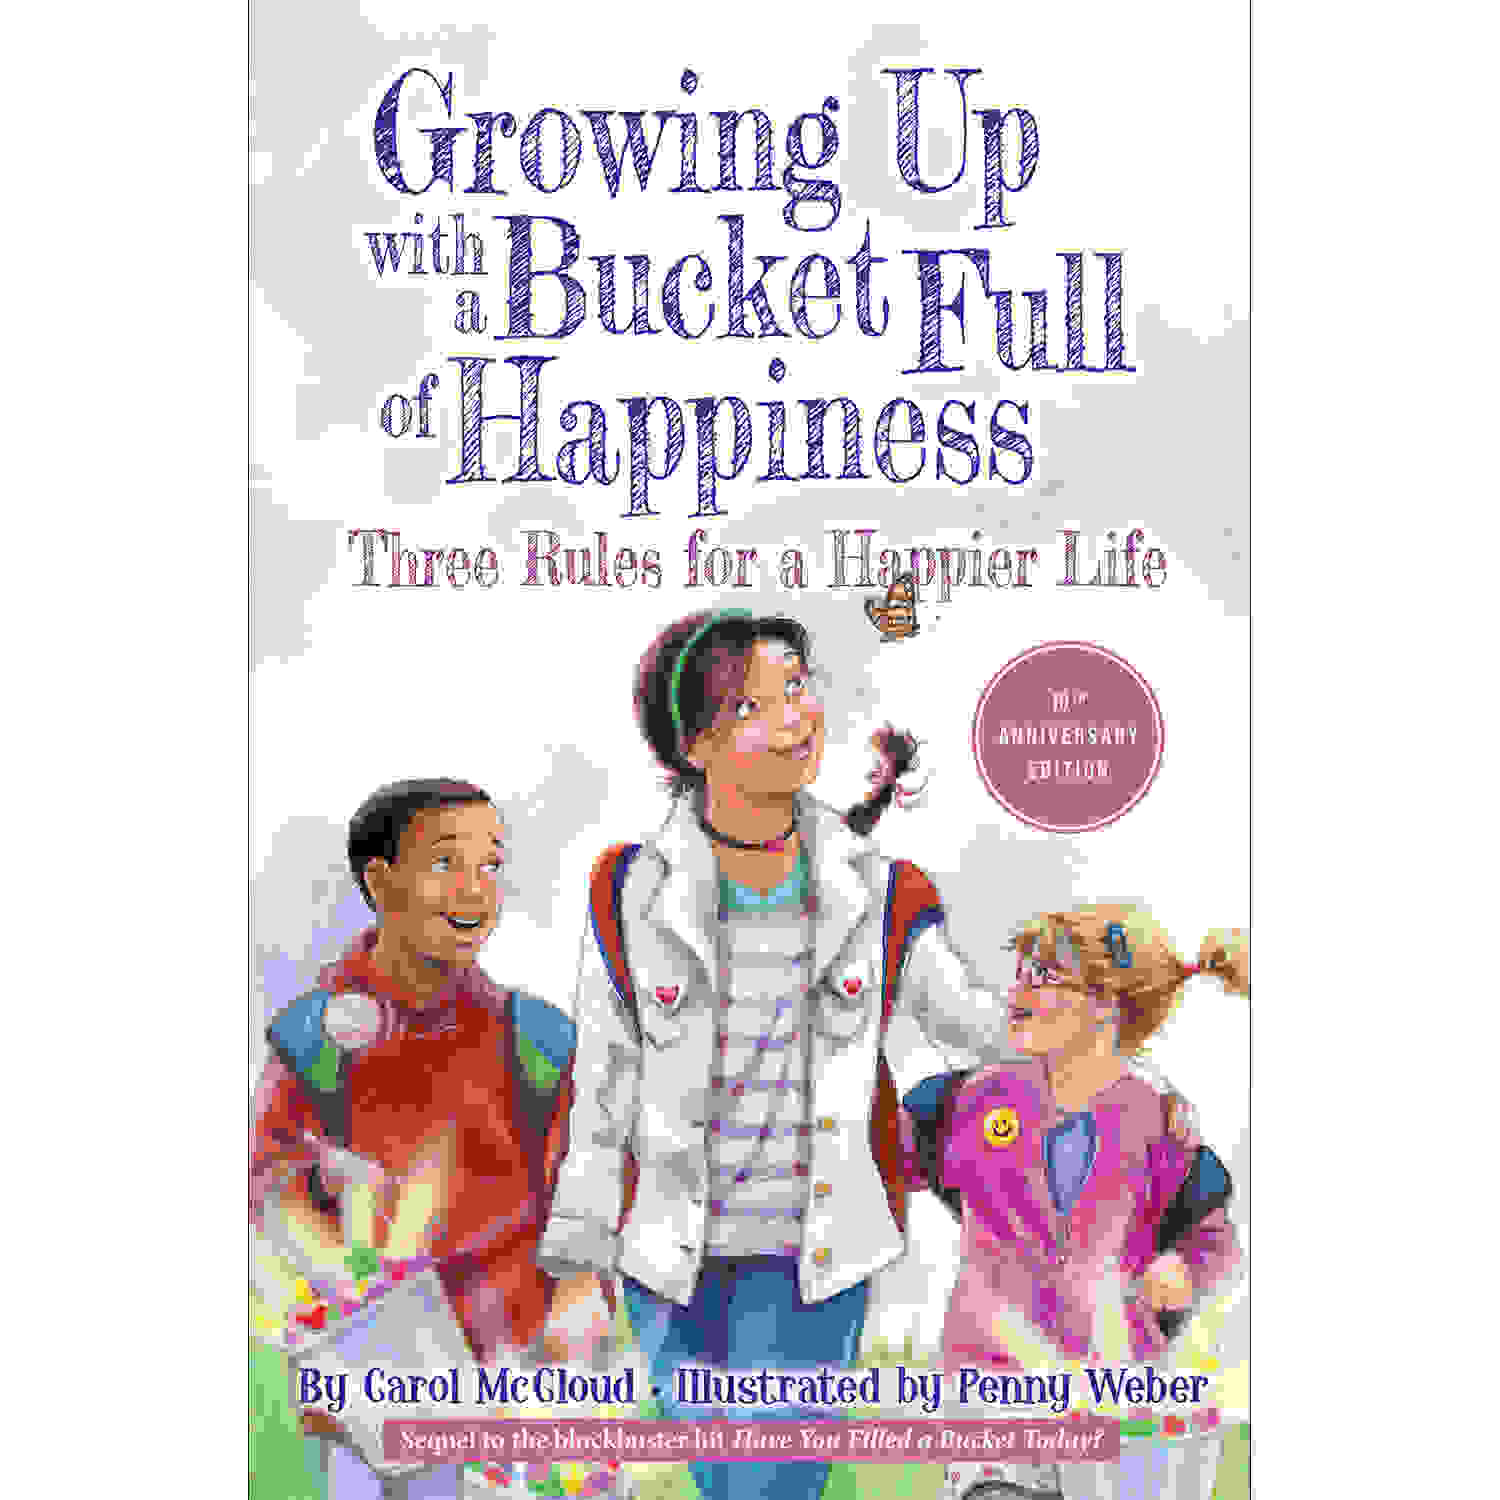 Growing Up With A Bucket Full of Happiness: Three Rules For a Happier Life